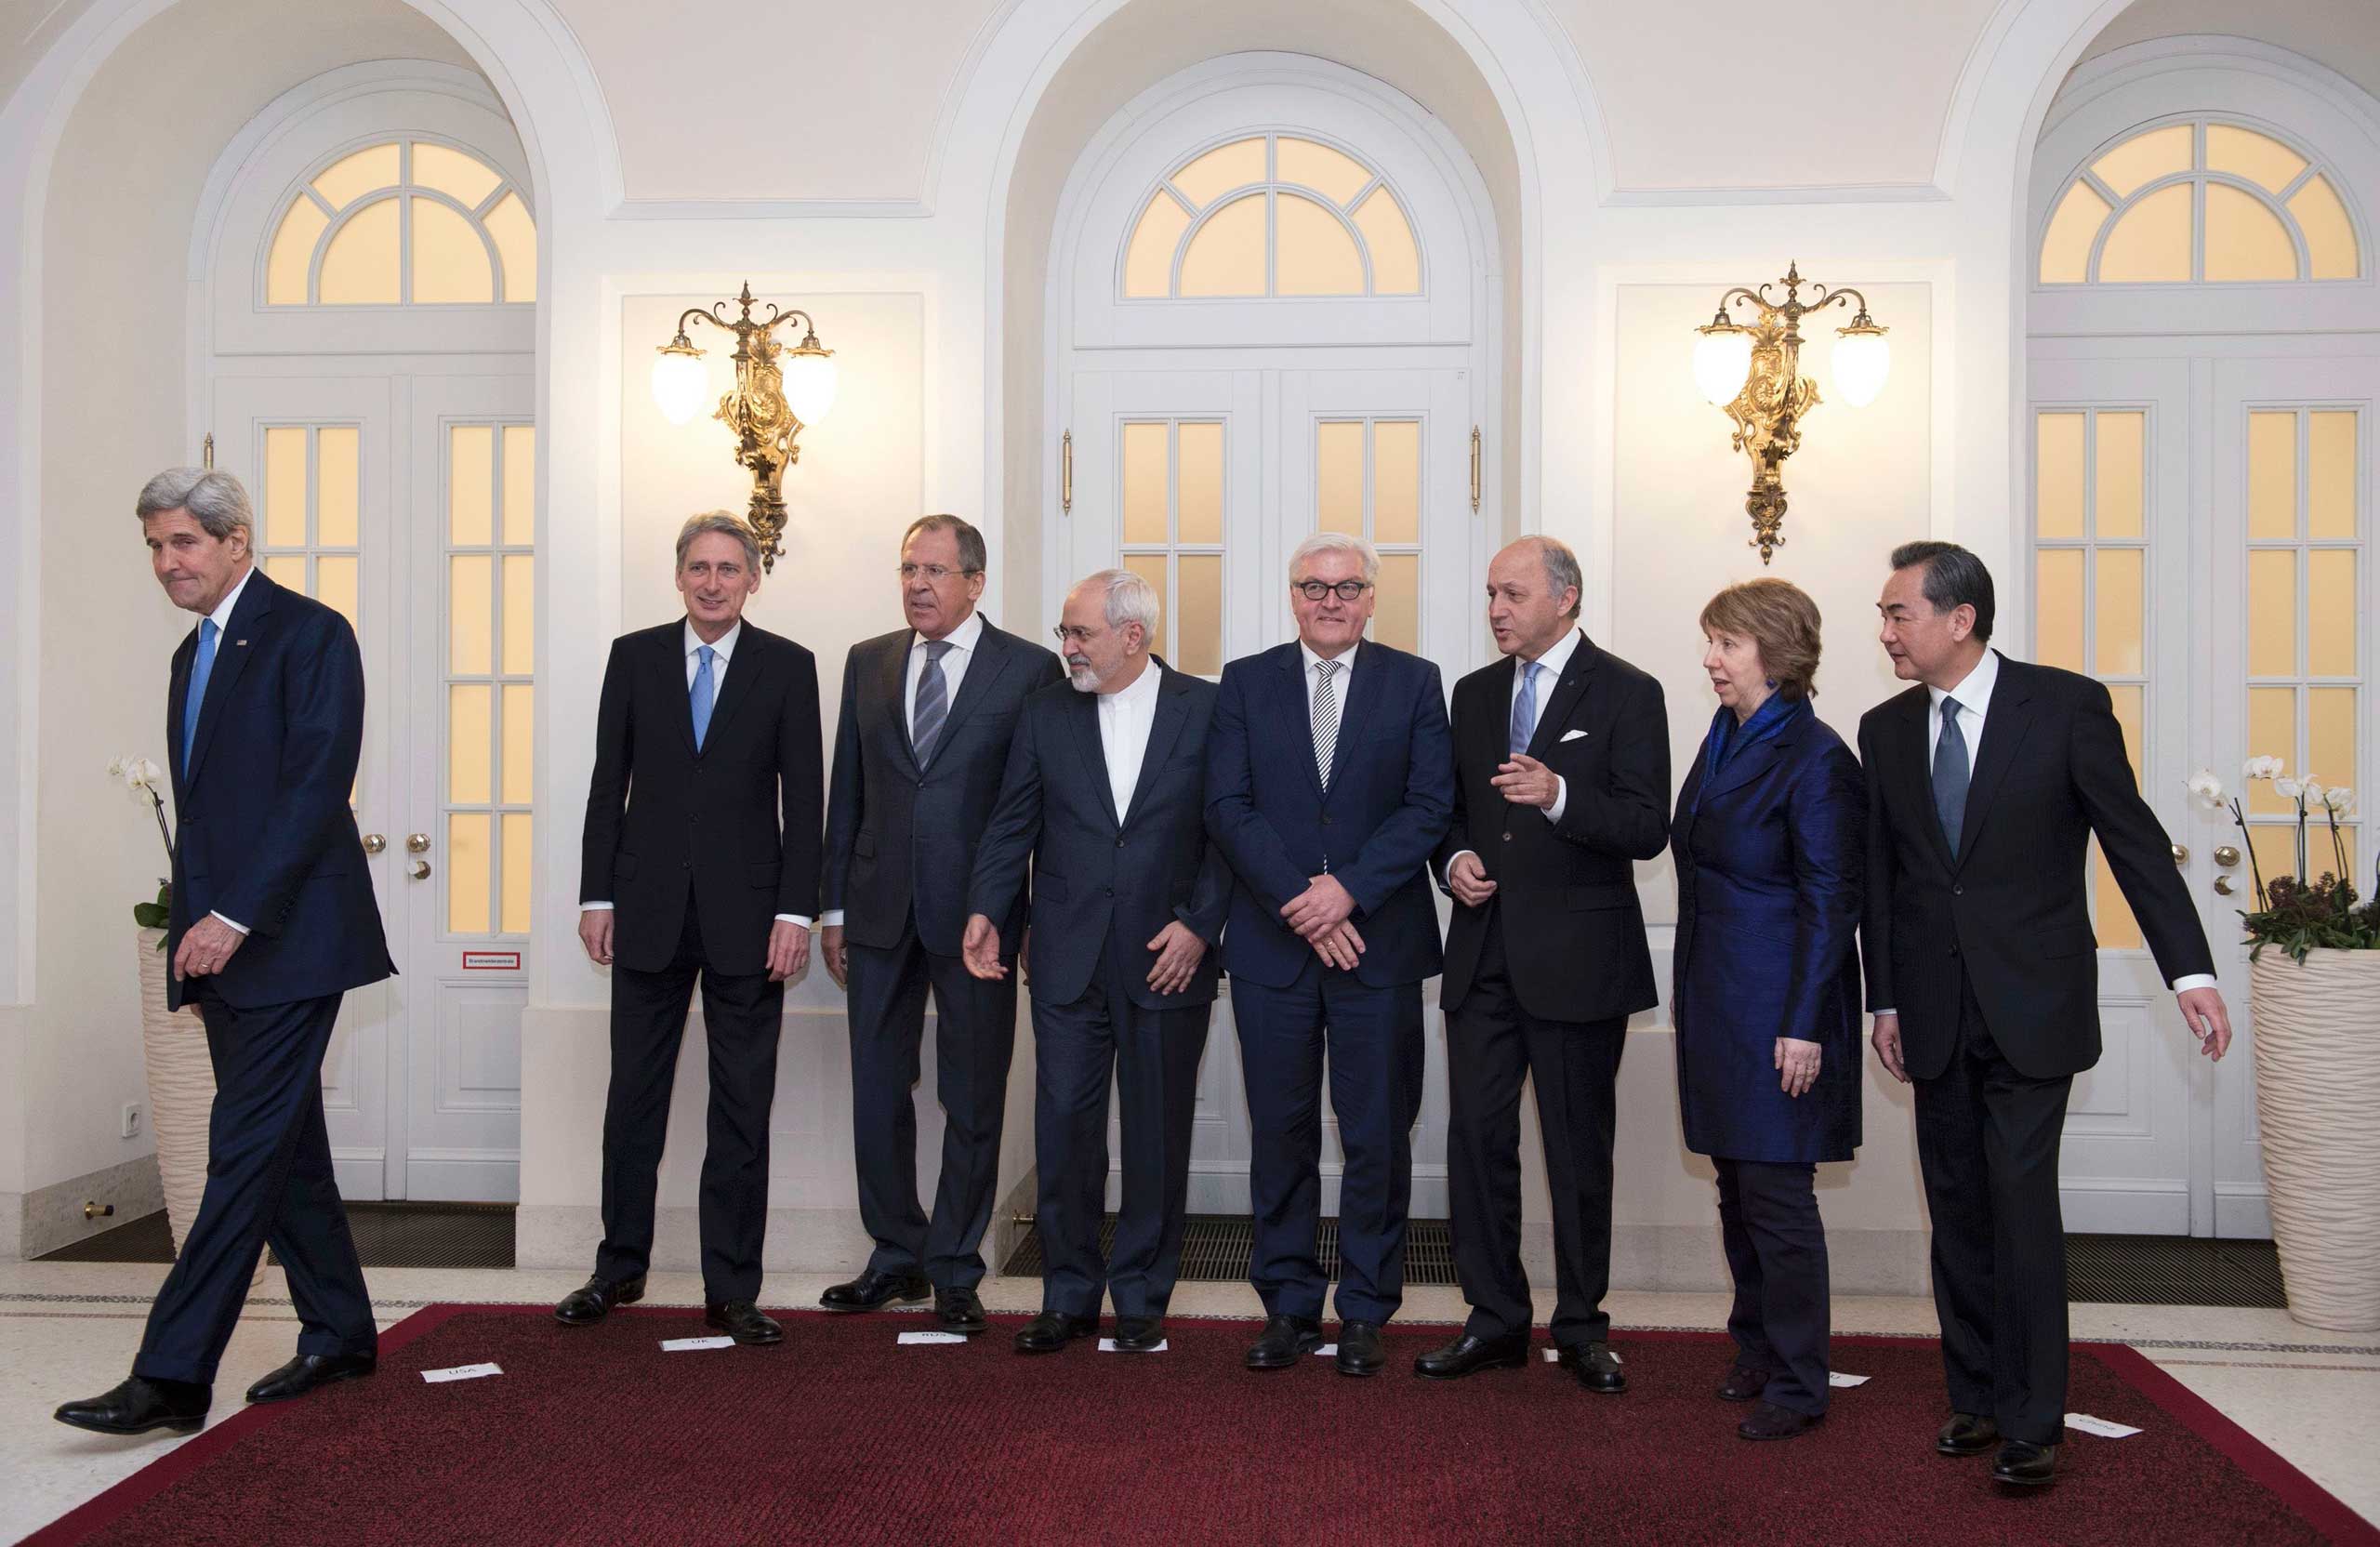 U.S. Secretary of State Kerry steps out as Britain's Foreign Secretary Hammond, Russian Foreign Minister Lavrov, Iranian FM Zarif and German FM Steinmeier, French FM Fabius, EU envoy Ashton and Chinese FM Yi pose in Vienna